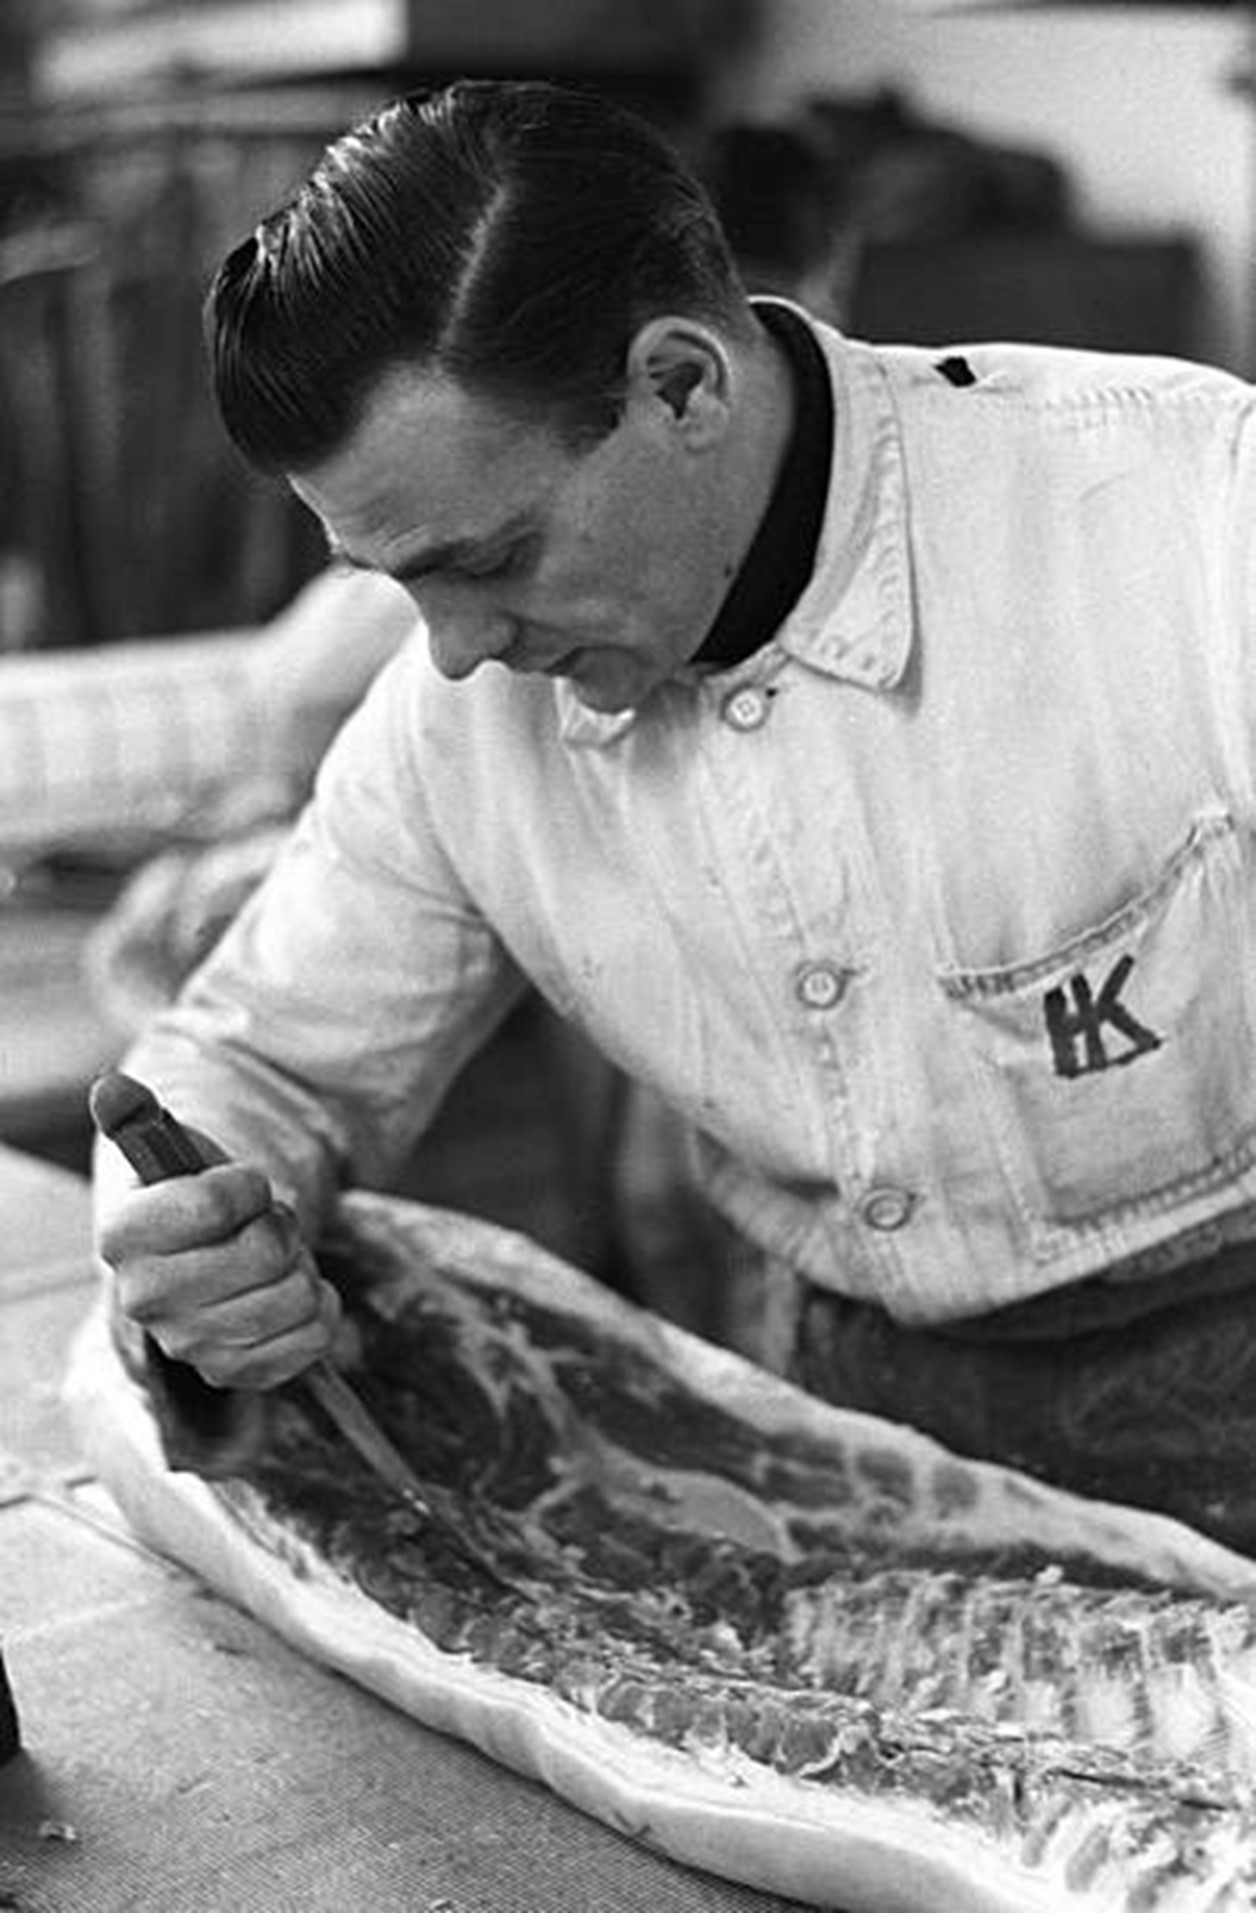 Tooley Street, 10th April 1963, a man cutting meat at a bacon warehouse.   X.jpg